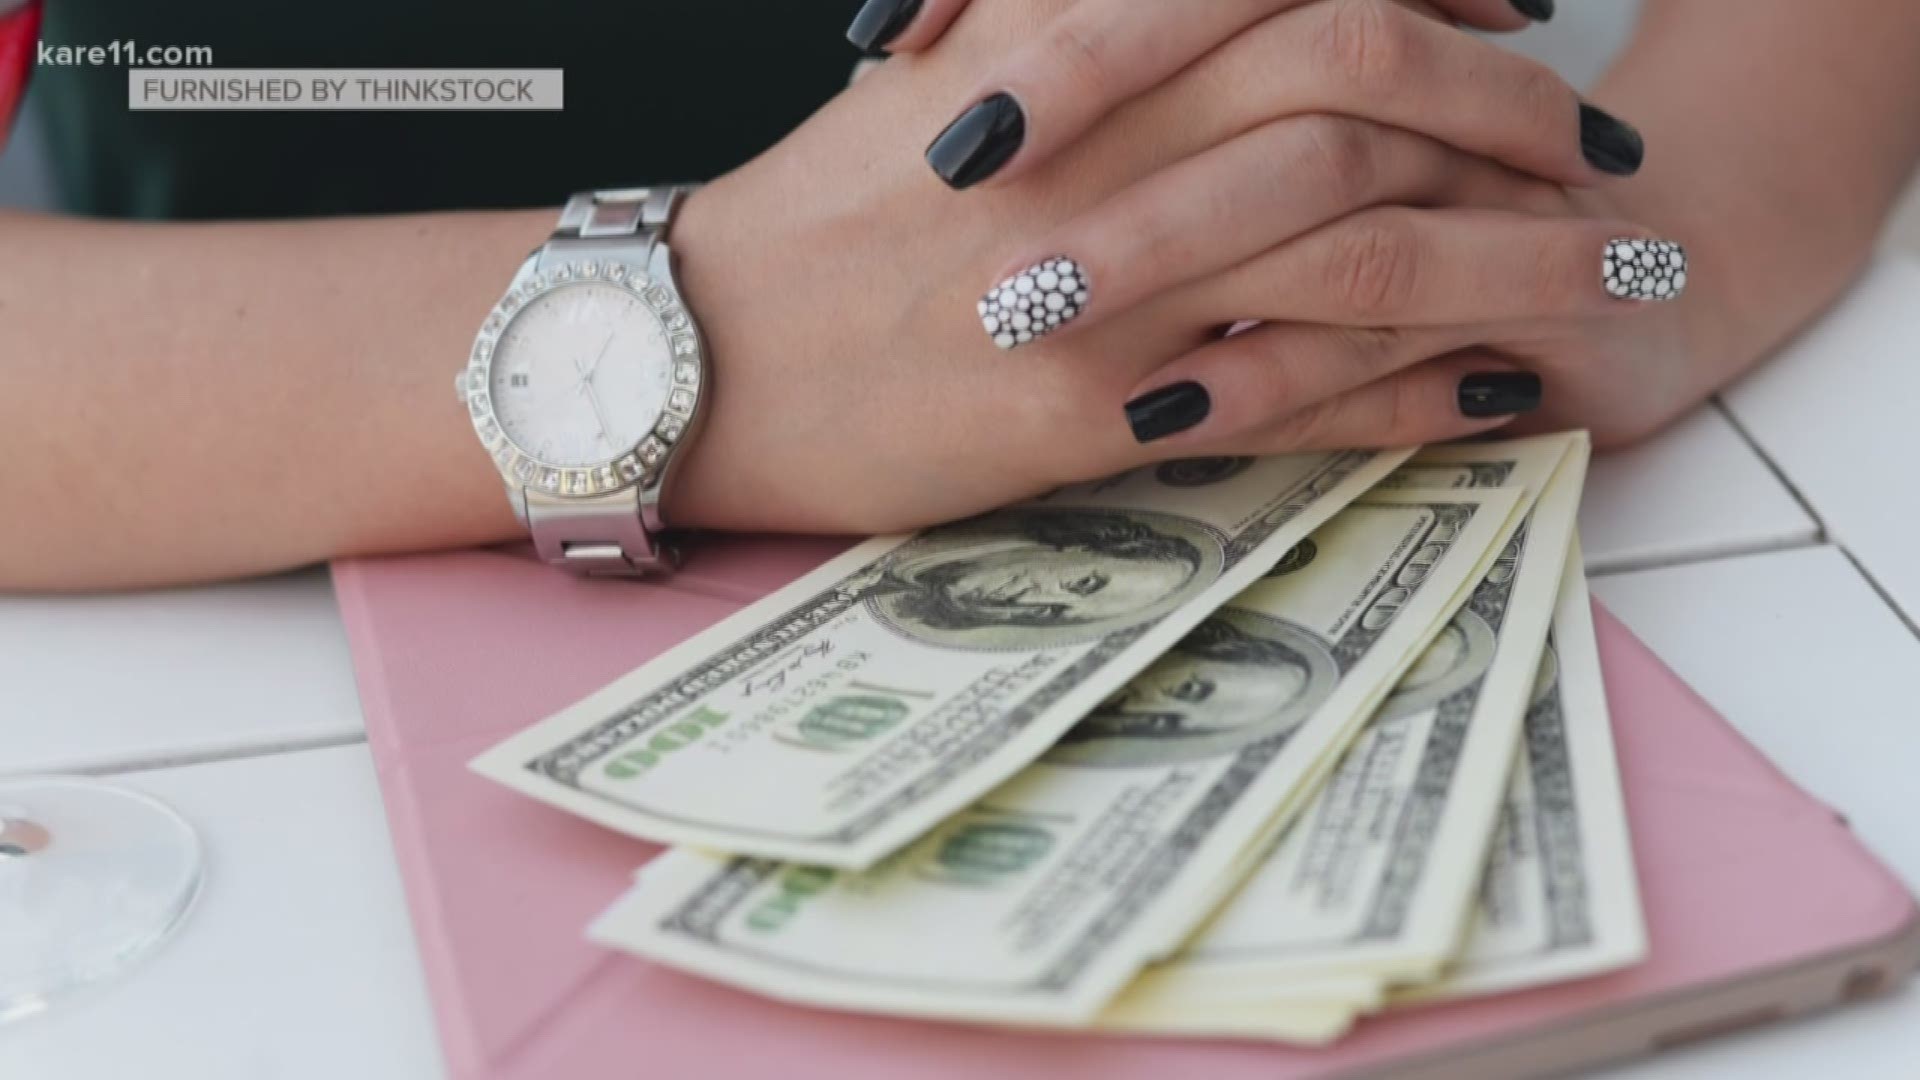 Most everyone worries about money at one time or another, but a new study reflects that women worry more about running out of cash and struggling with their future finances than men.